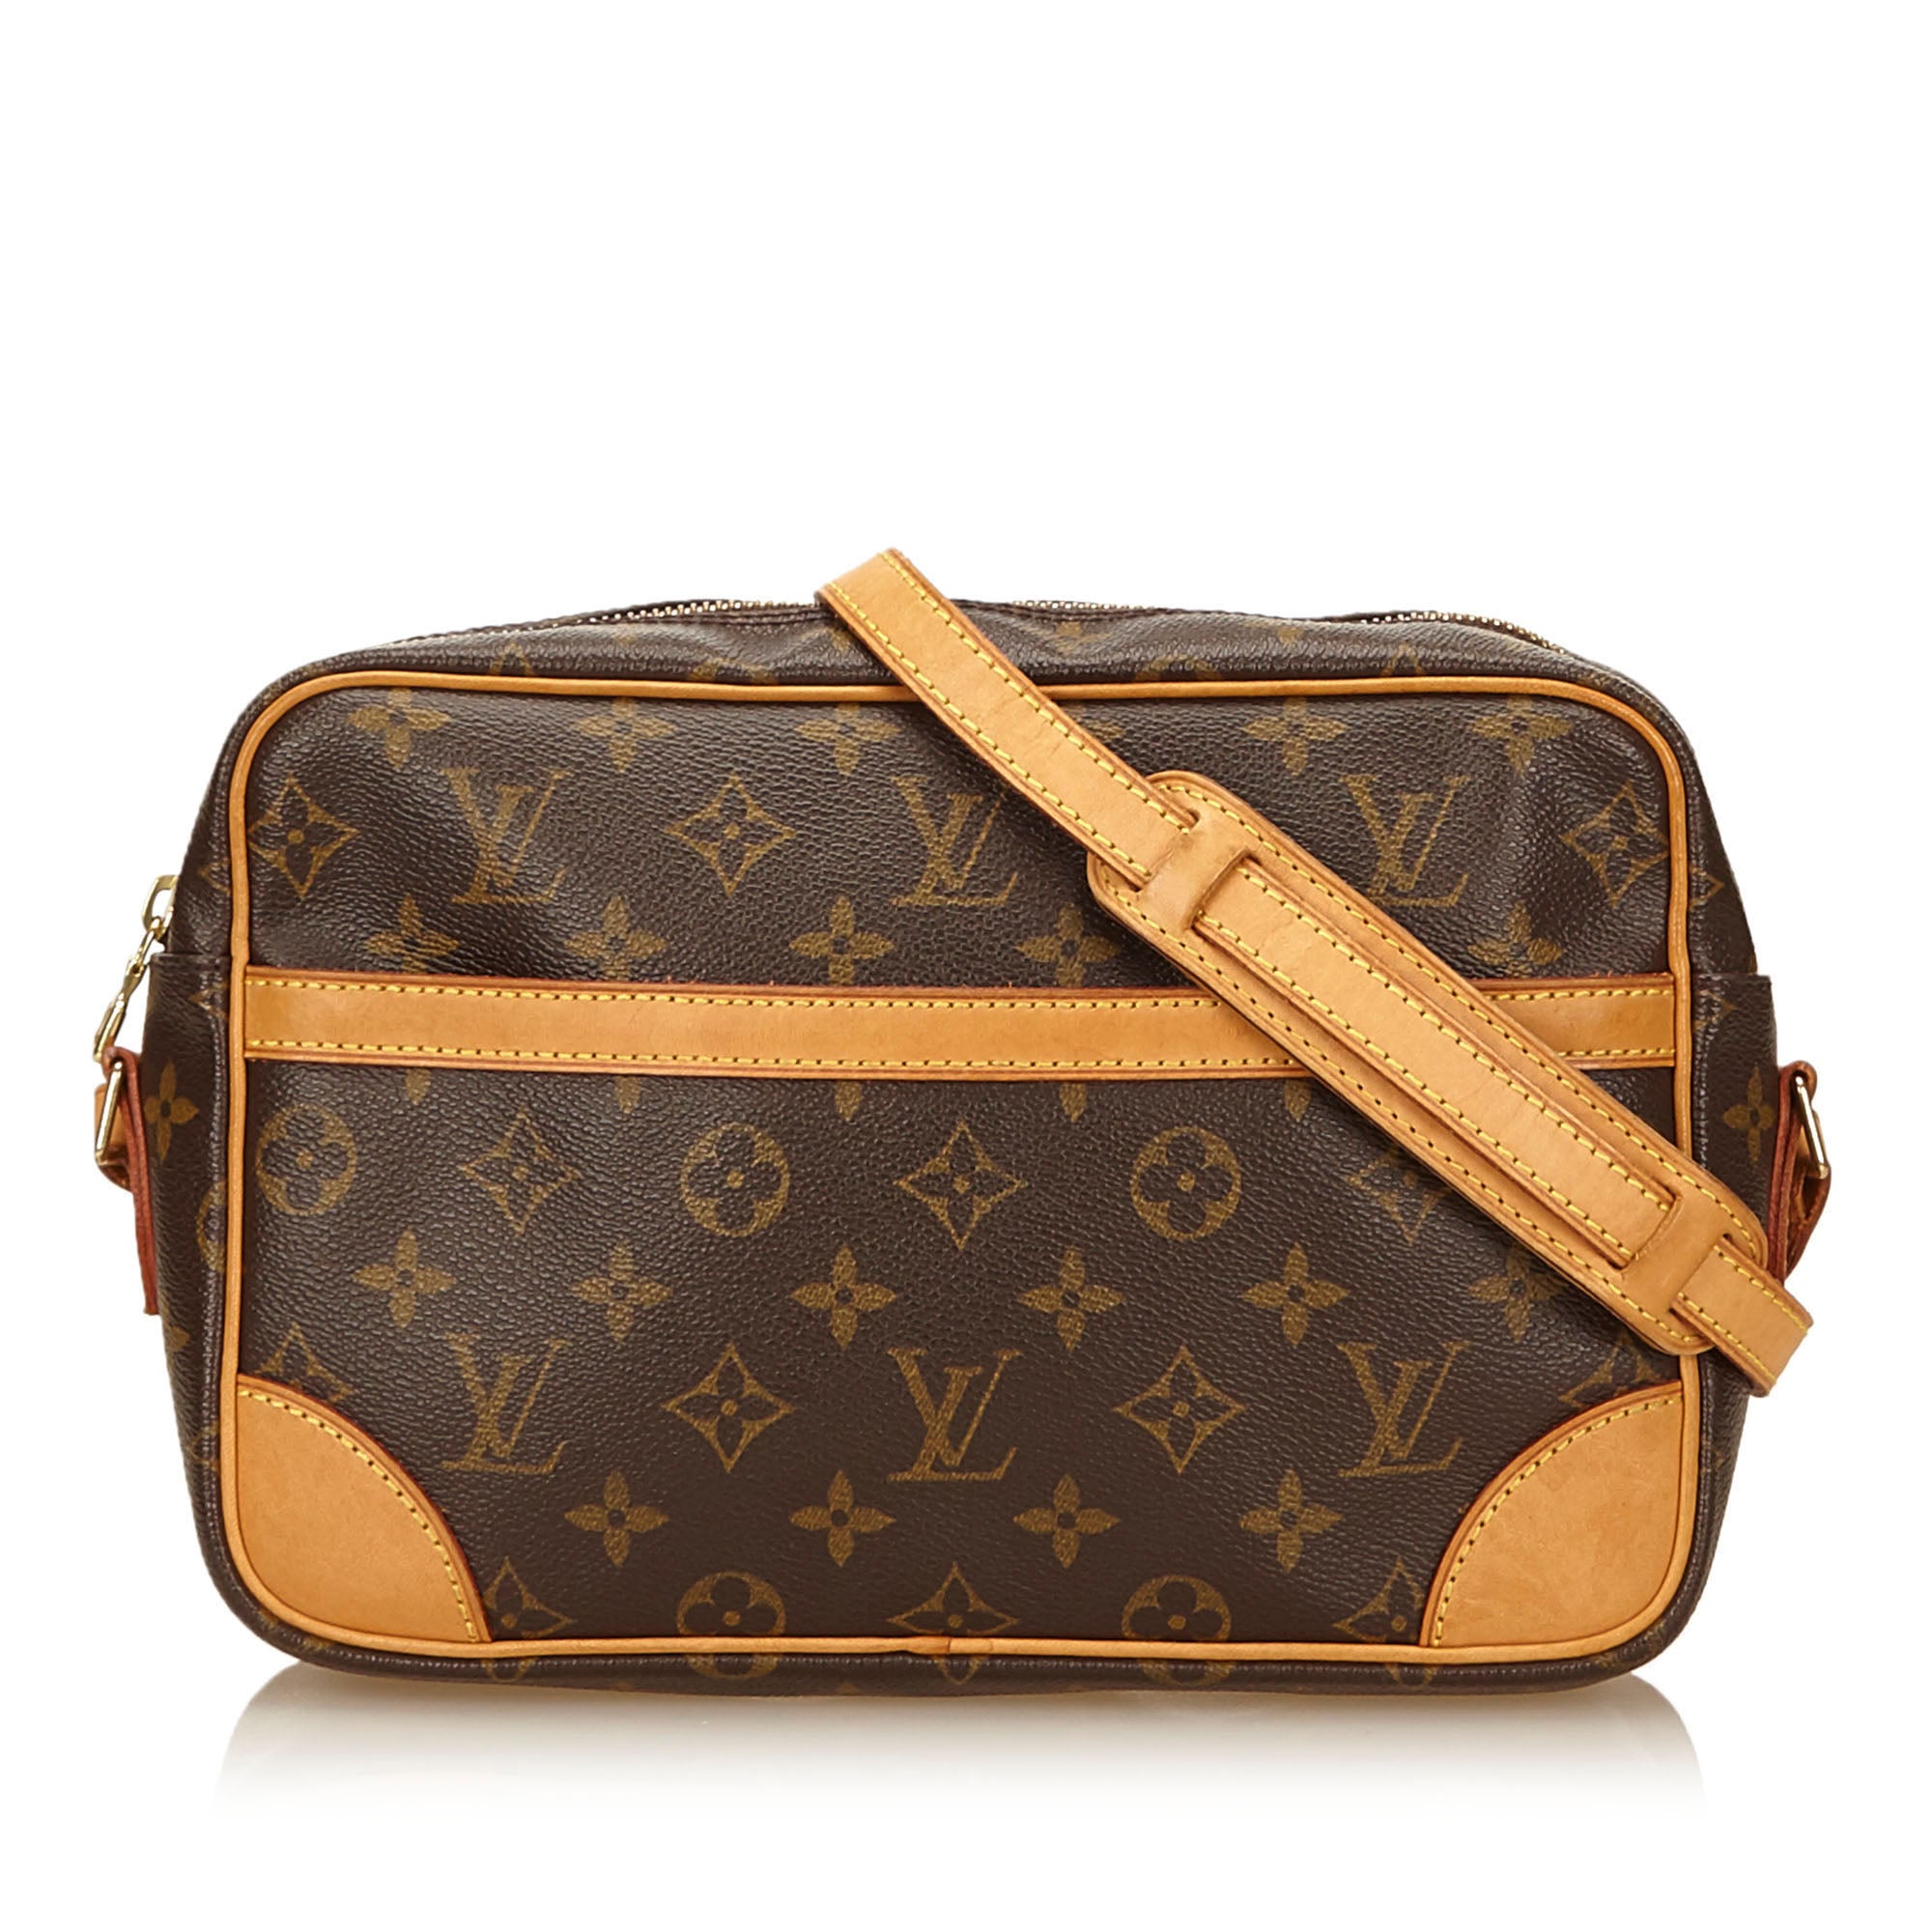 Louis Vuitton TROCADERO Cross body  Most affordable LV bag   YouTube